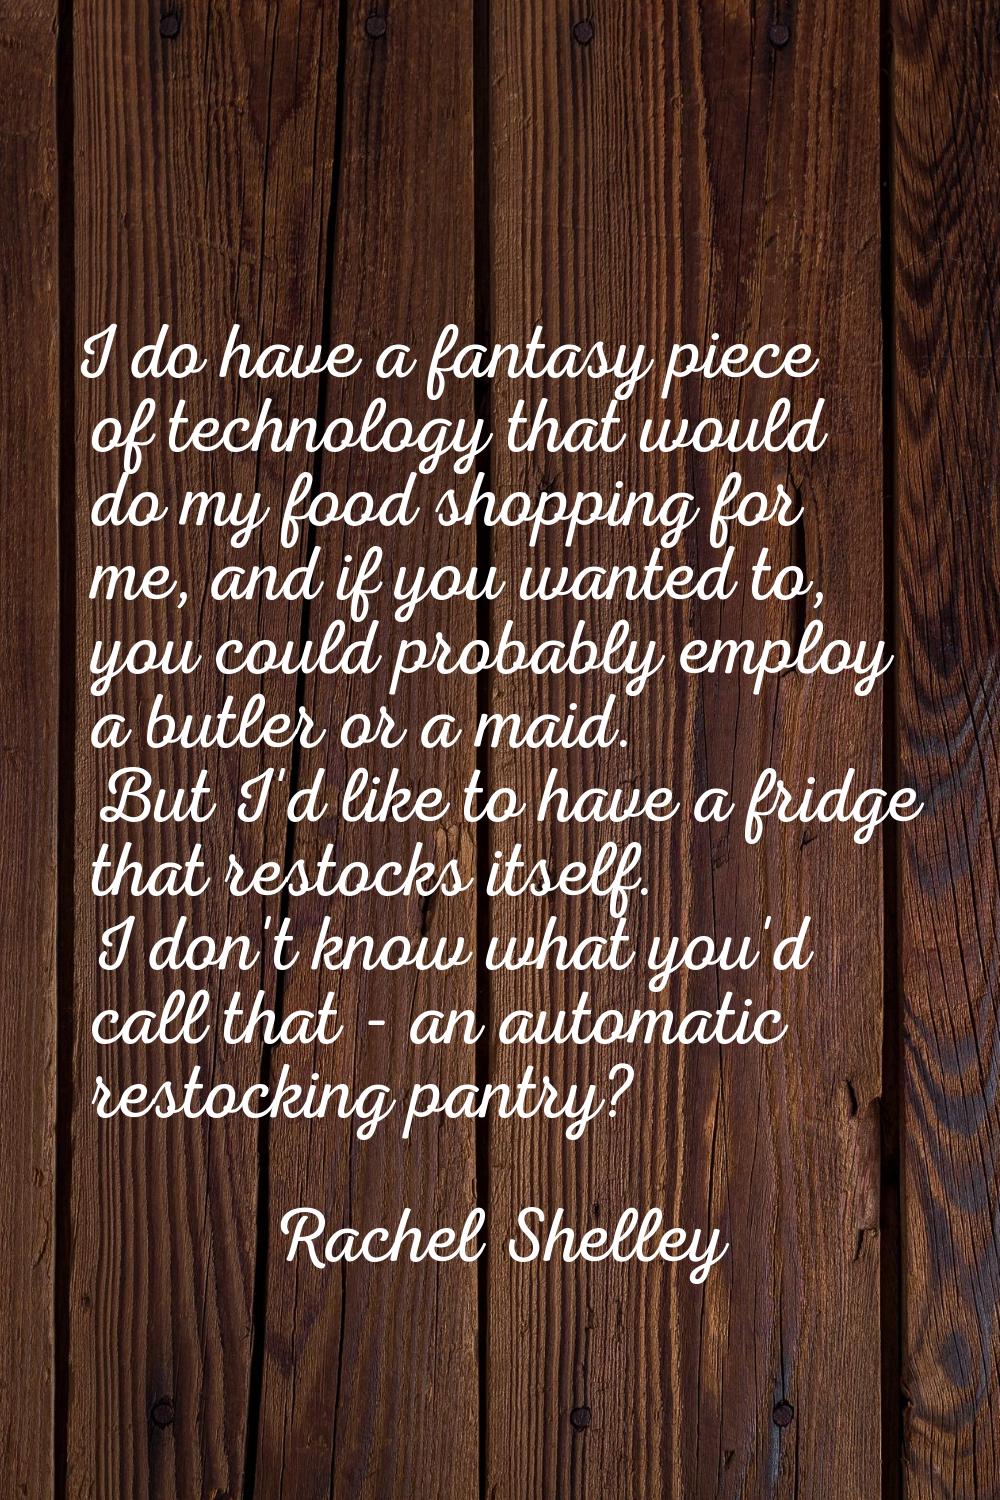 I do have a fantasy piece of technology that would do my food shopping for me, and if you wanted to